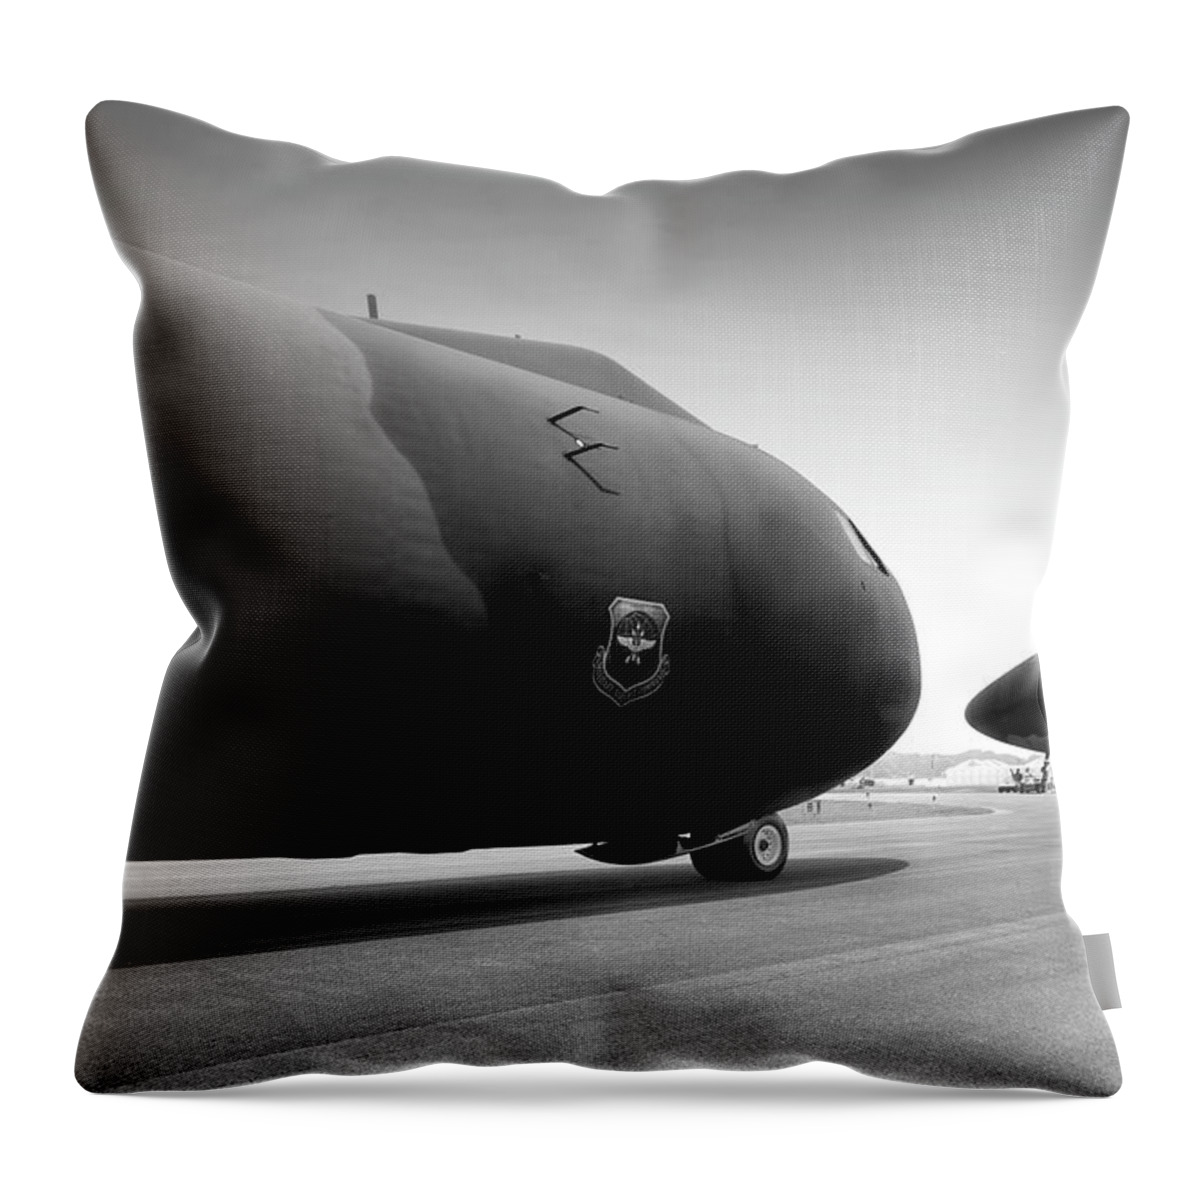 Black & White Throw Pillow featuring the photograph Dinosaur Petting Zoo by Frederic A Reinecke